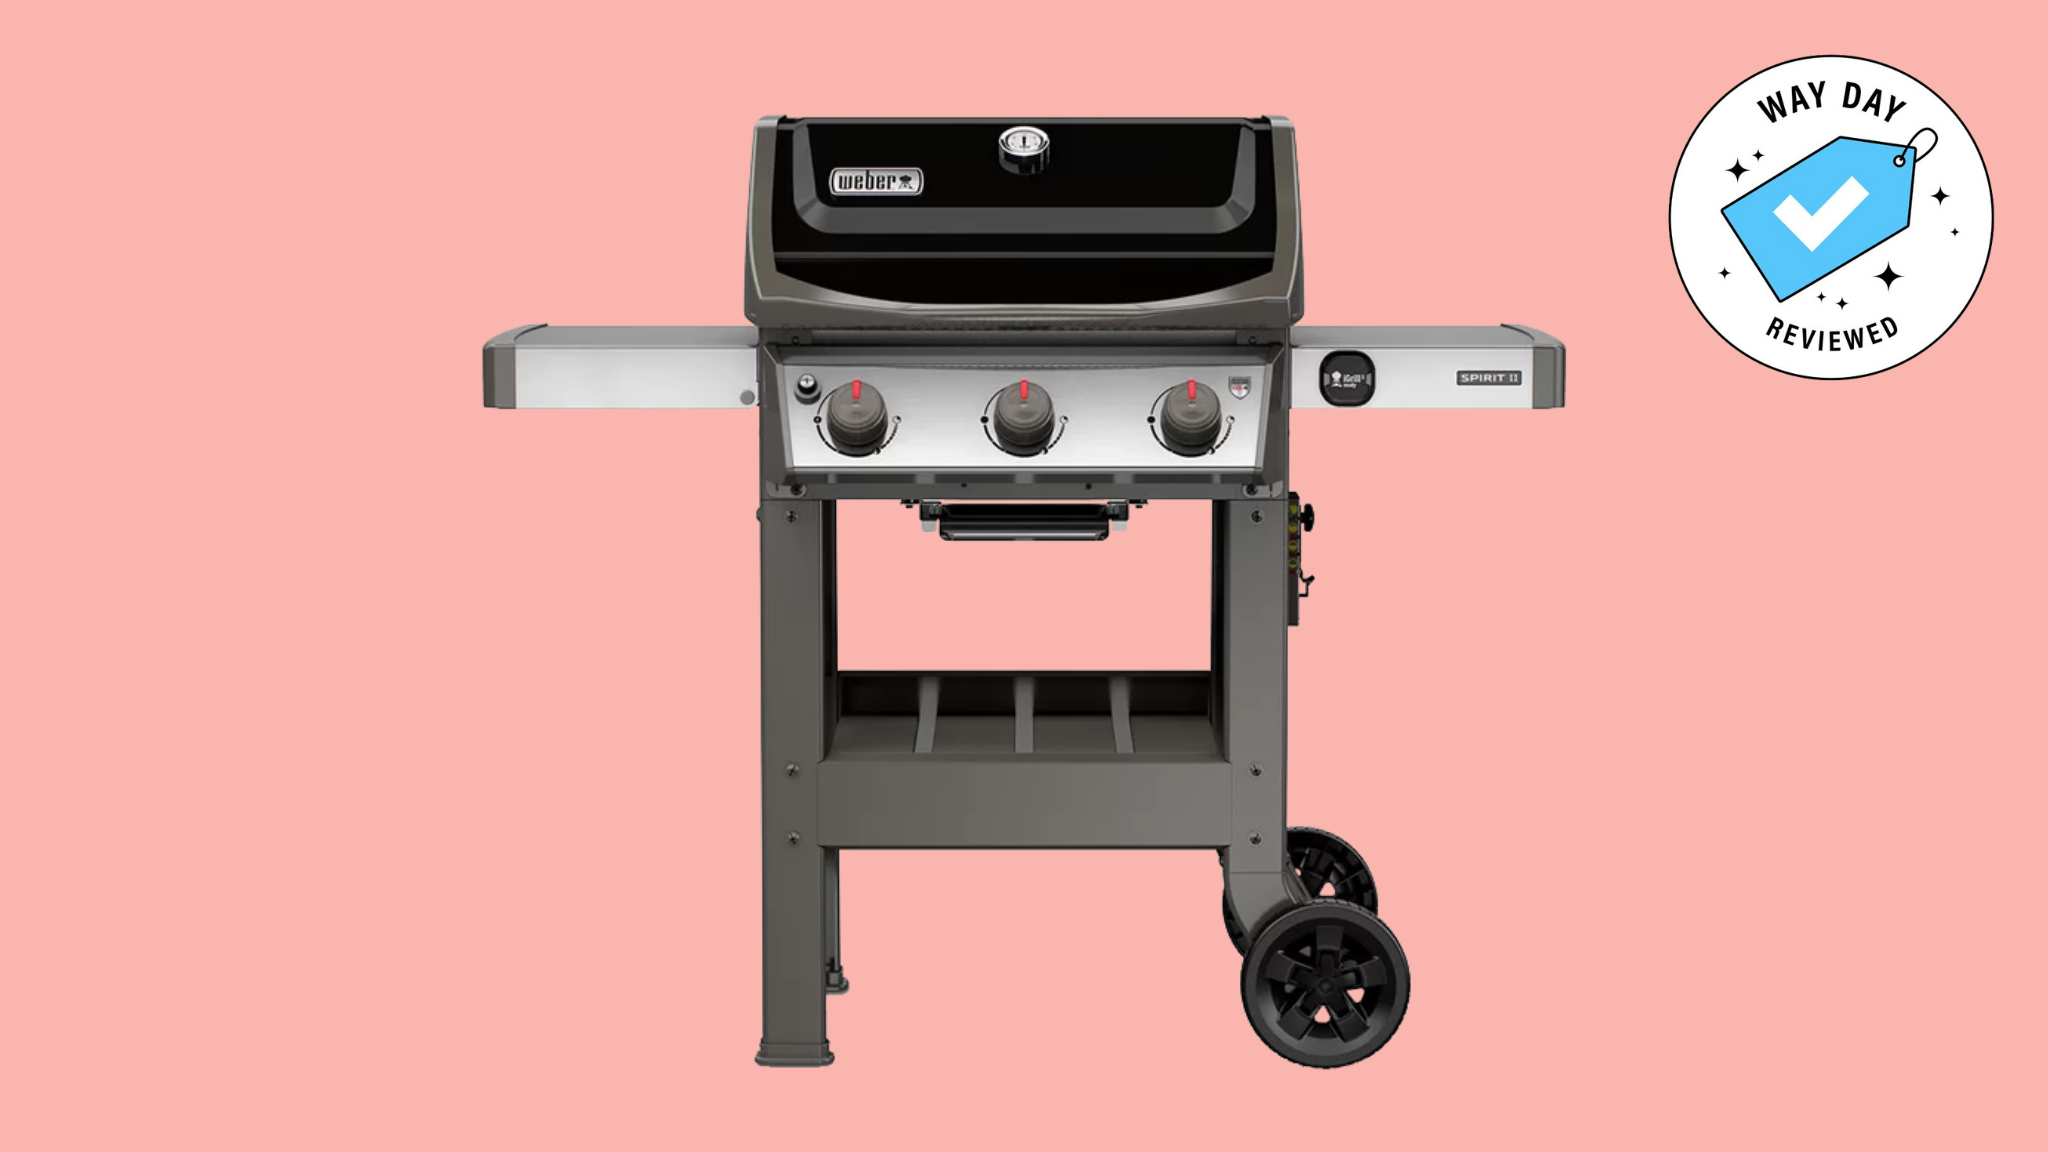 Day 2023 sale: our favorite gas grill at Wayfair